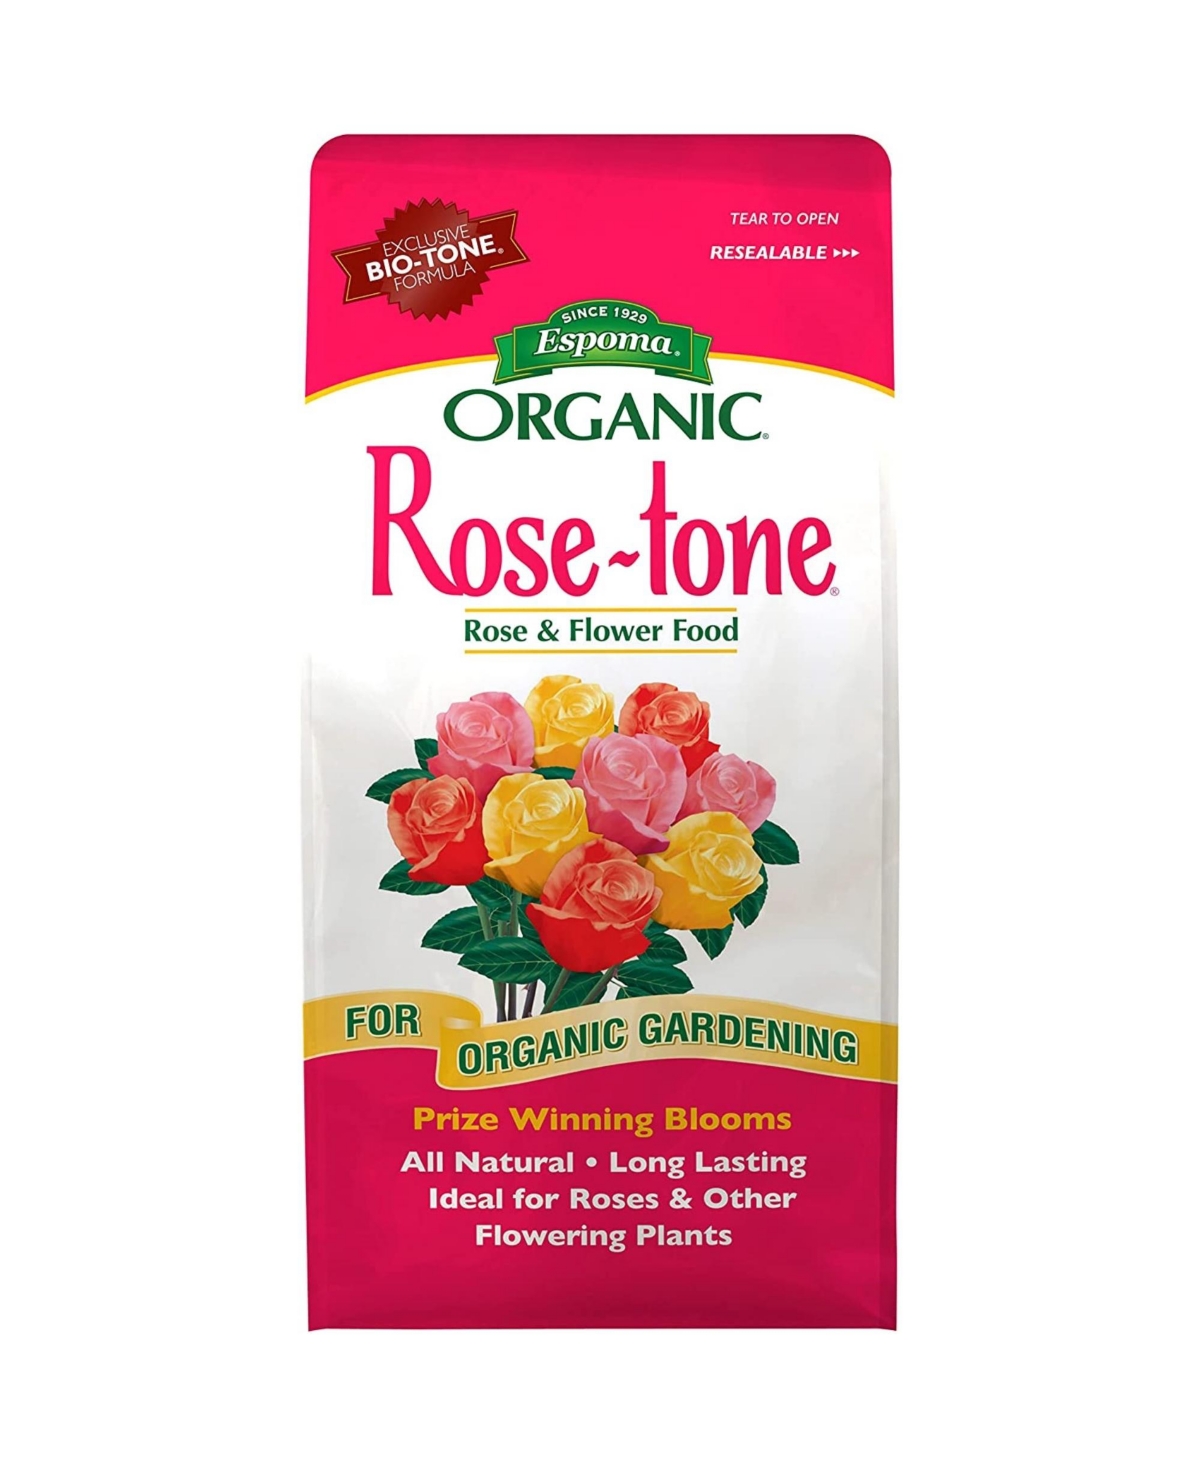 Organic Rose-tone Rose & Flower Food, 18 Lbs - Open Miscellaneous